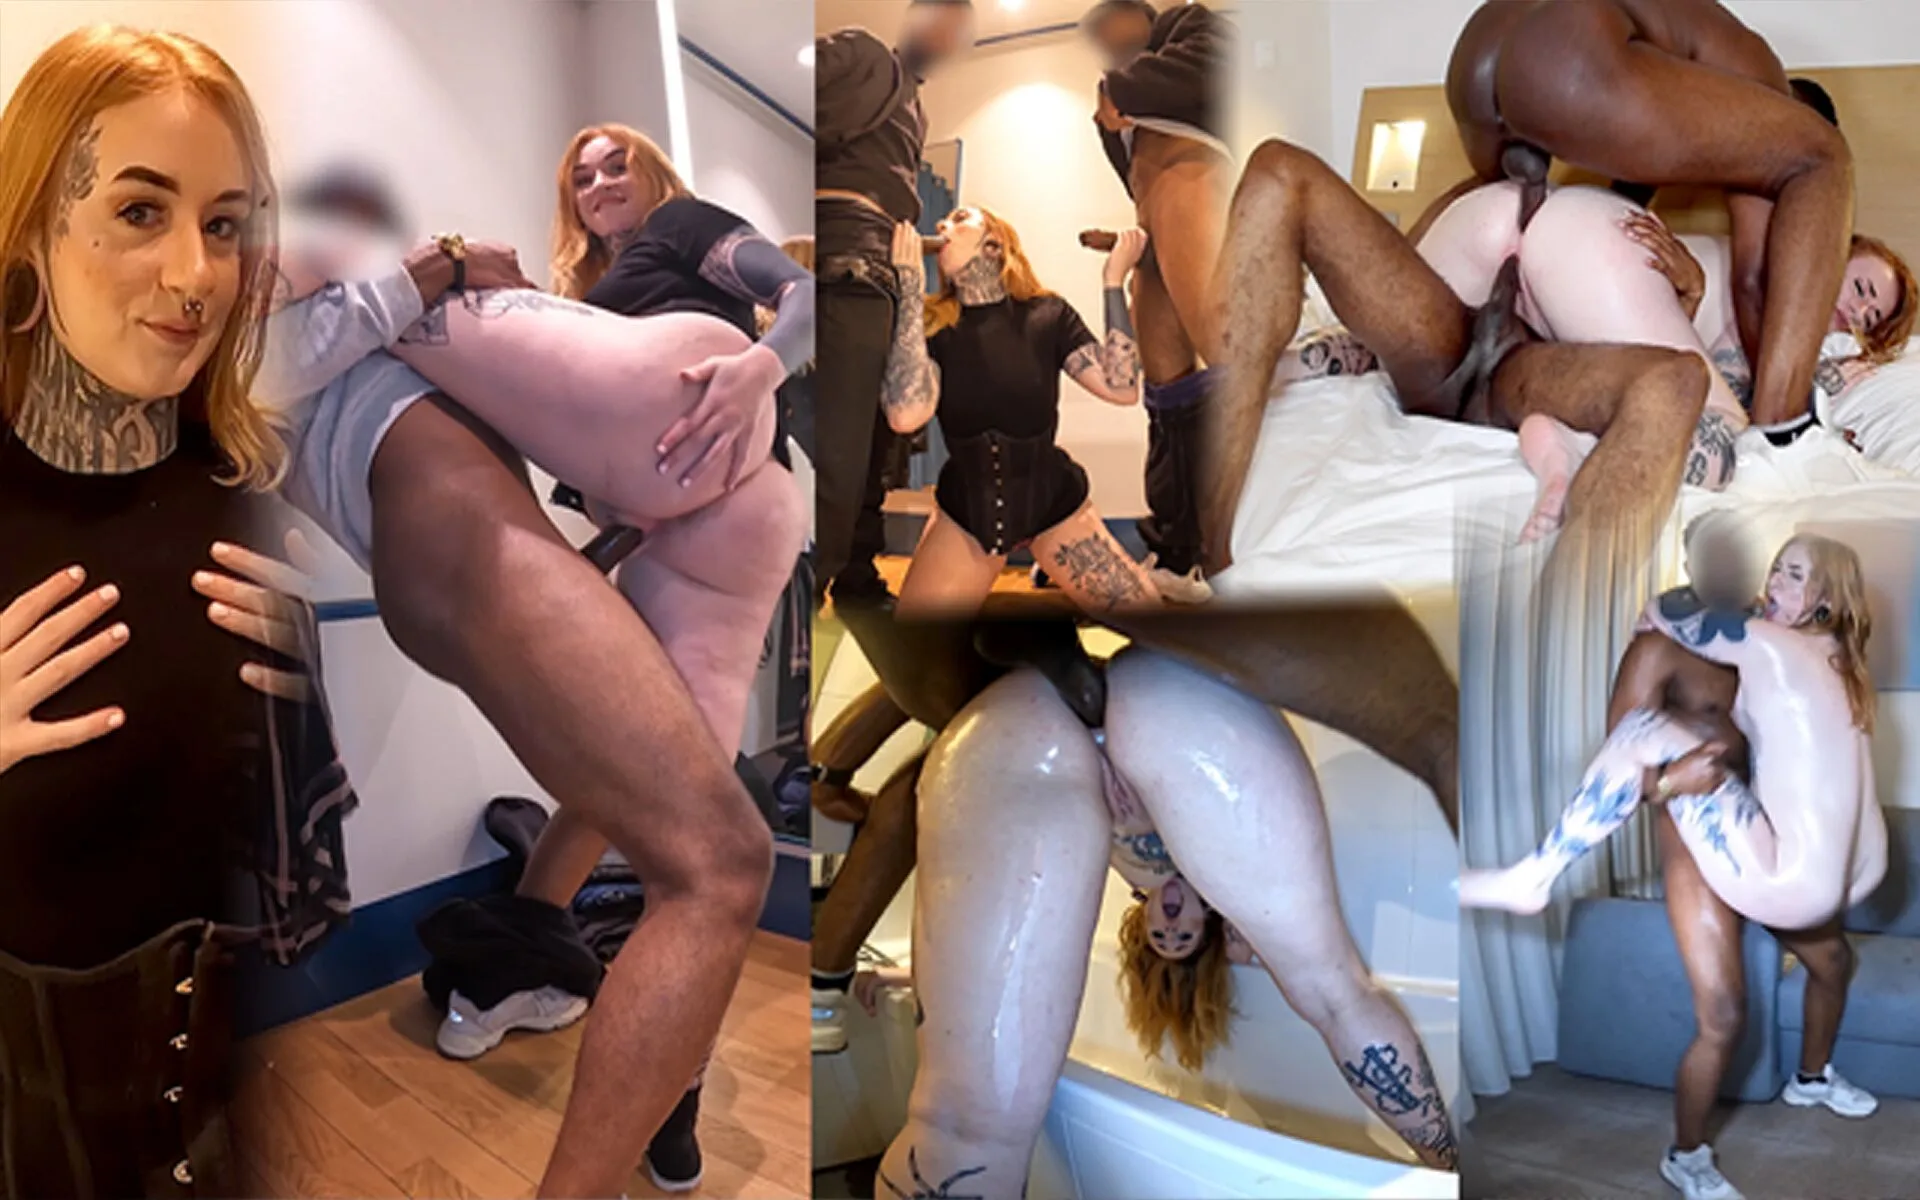 Big Ass British Student Gets Anal Fucked Hard in Fitting Room and Hotel Corridor by 2 Strangers!!! by Reels plans Faphouse